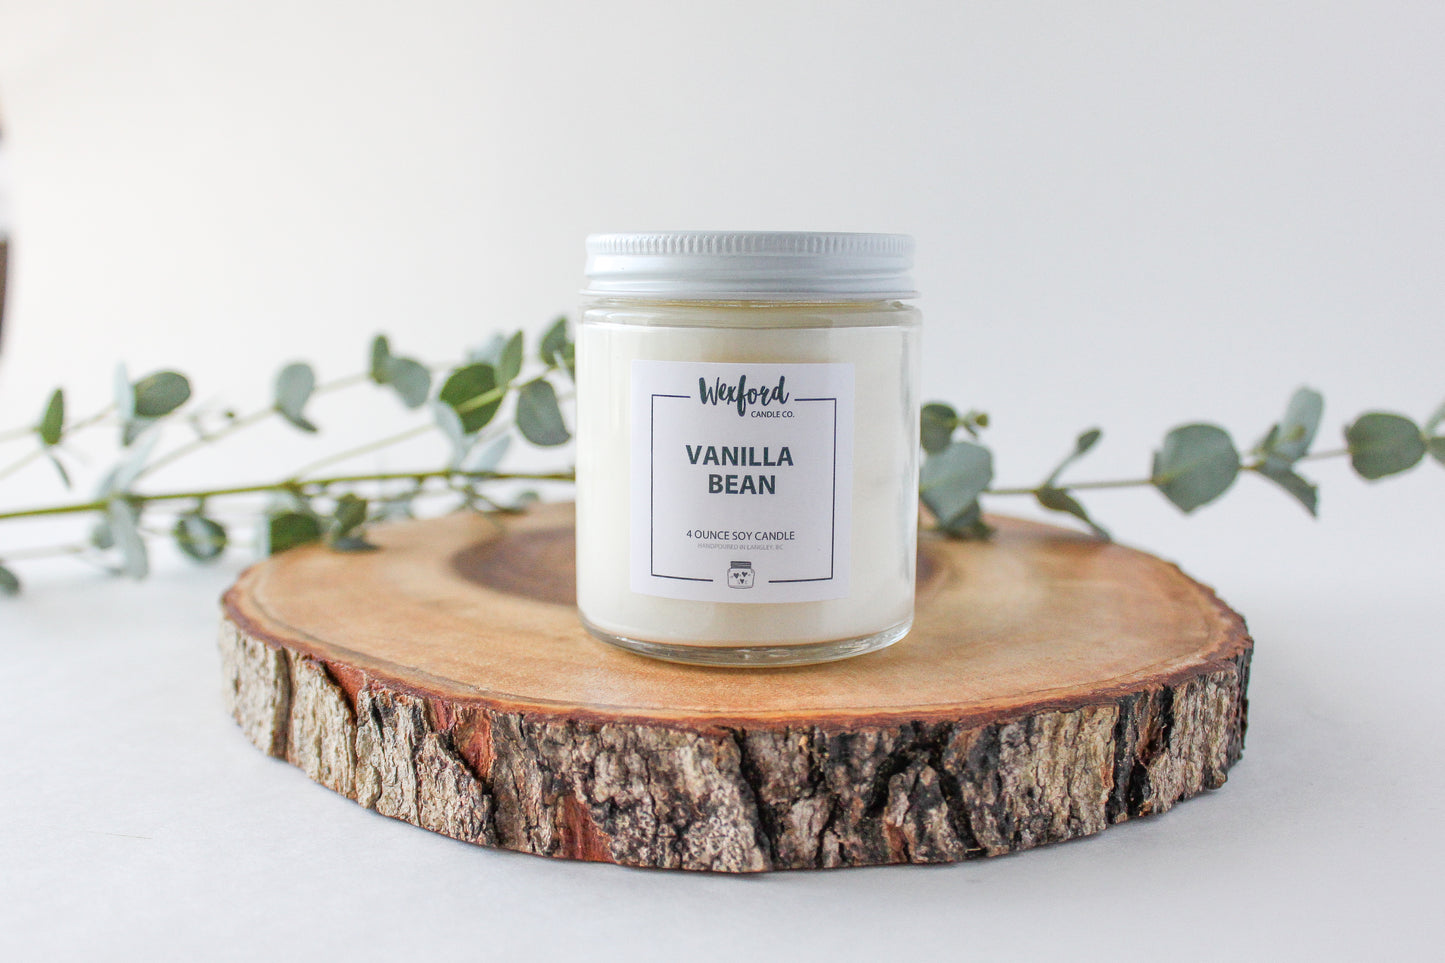 Vanilla Bean Soy Candle - Wexford Candle Co.